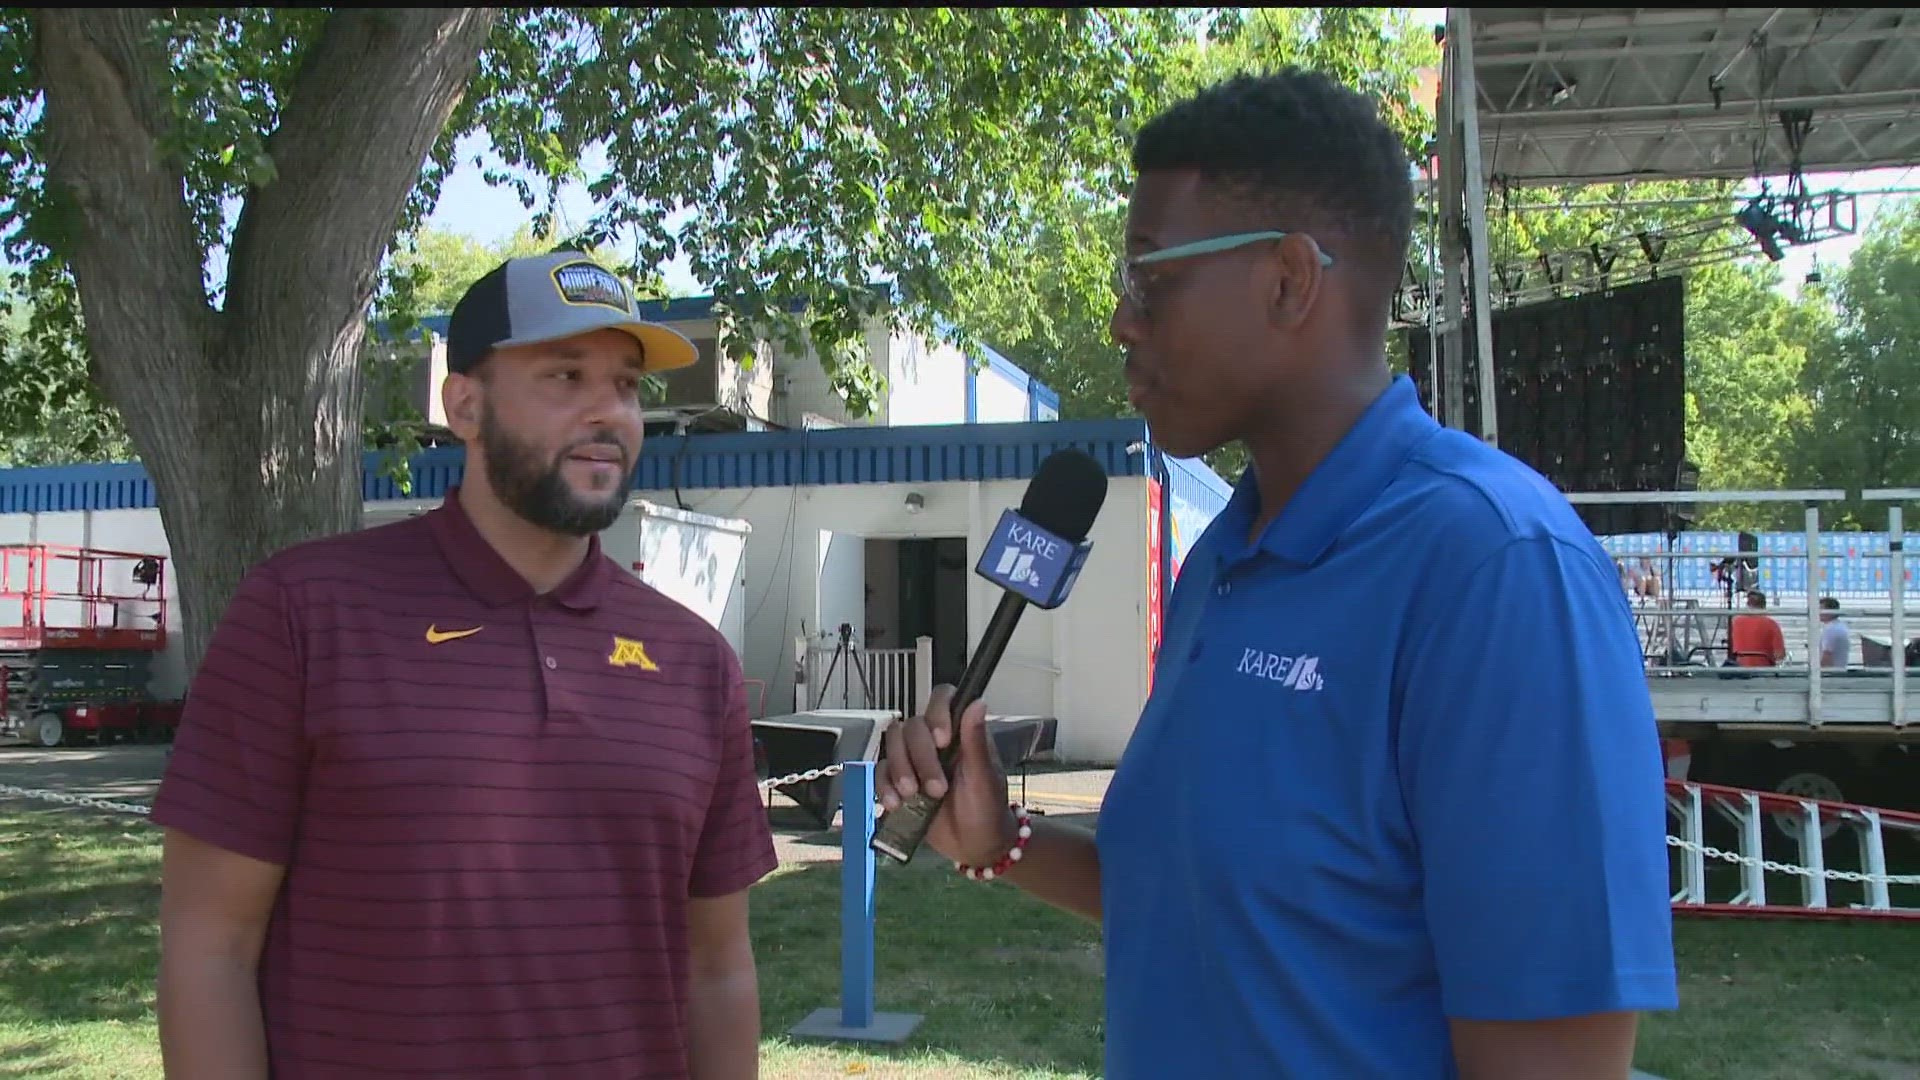 Gophers head basketball coach Ben Johnson has been coming to the Minnesota State Fair since 1989. So he's the best person to ask 11 questions, state fair style!